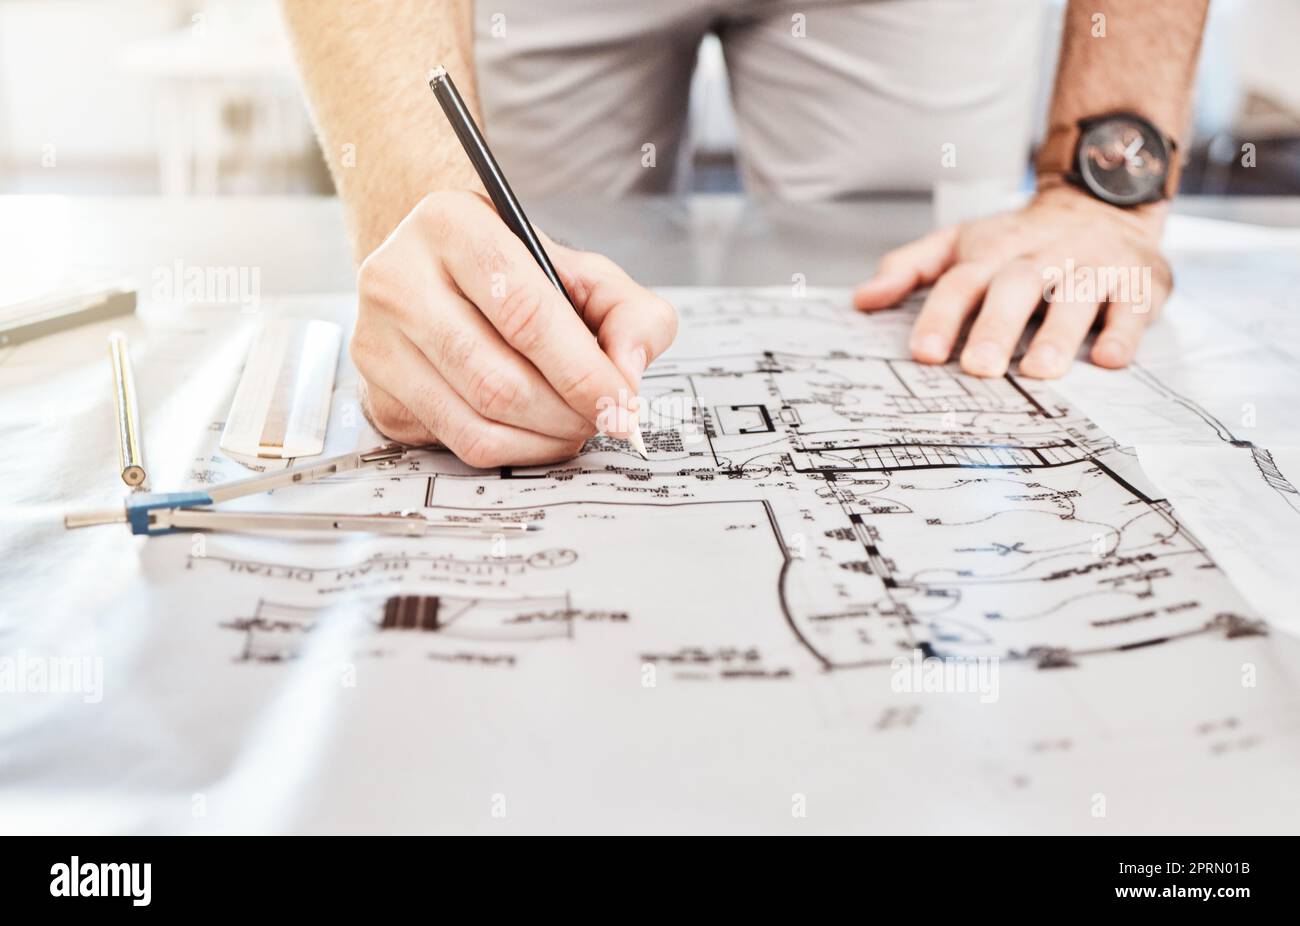 Drawing construction on blueprint, planning architecture design on paper and writing notes on building documents on table in work office. Designer, architect and builder with strategy for renovation Stock Photo